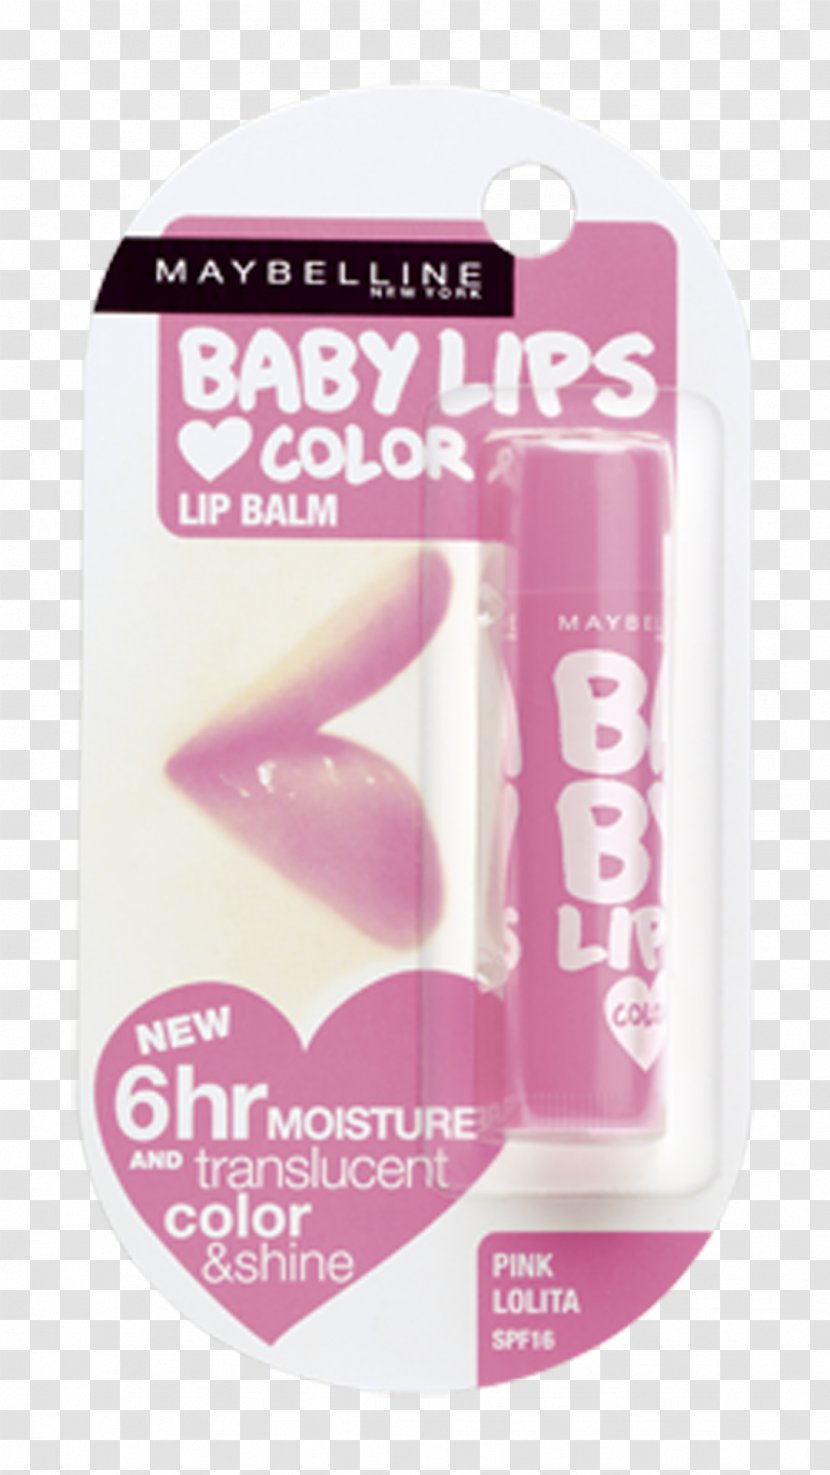 Lip Balm Color Maybelline Pink - Female Skin Care Products Transparent PNG